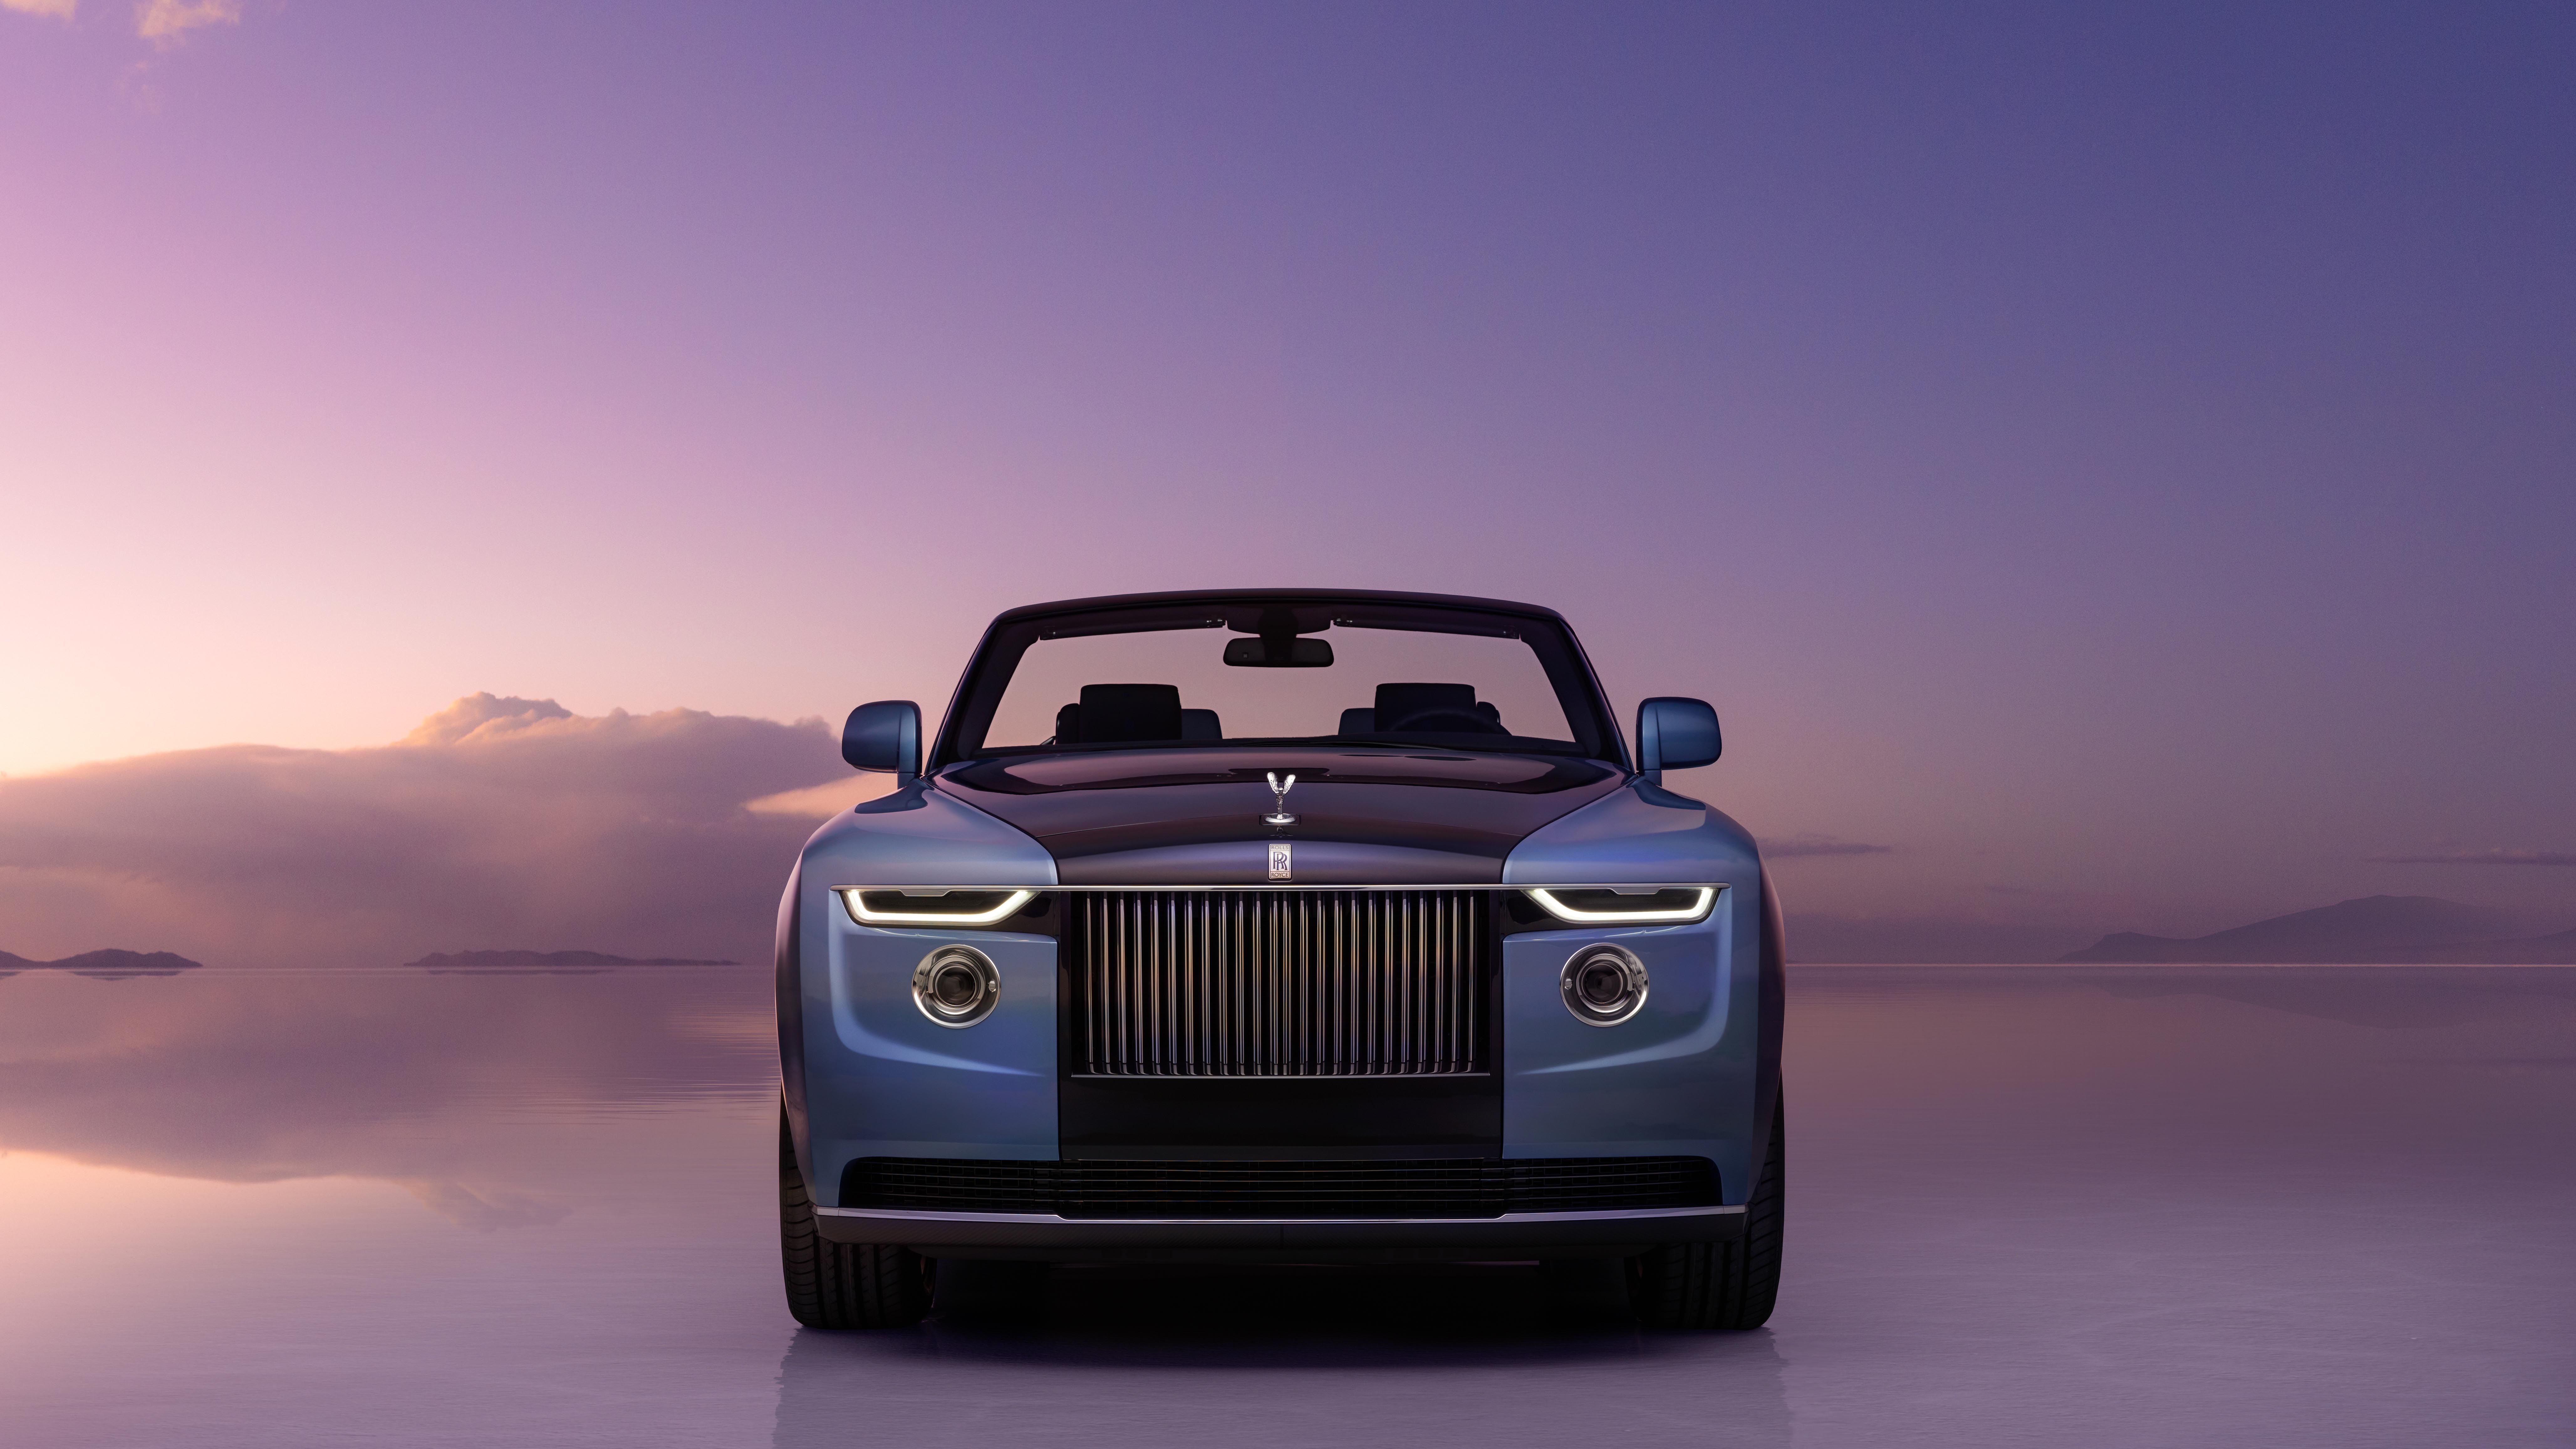 RollsRoyce Sweptail  The Sweptail unveiled at the Concors  Flickr